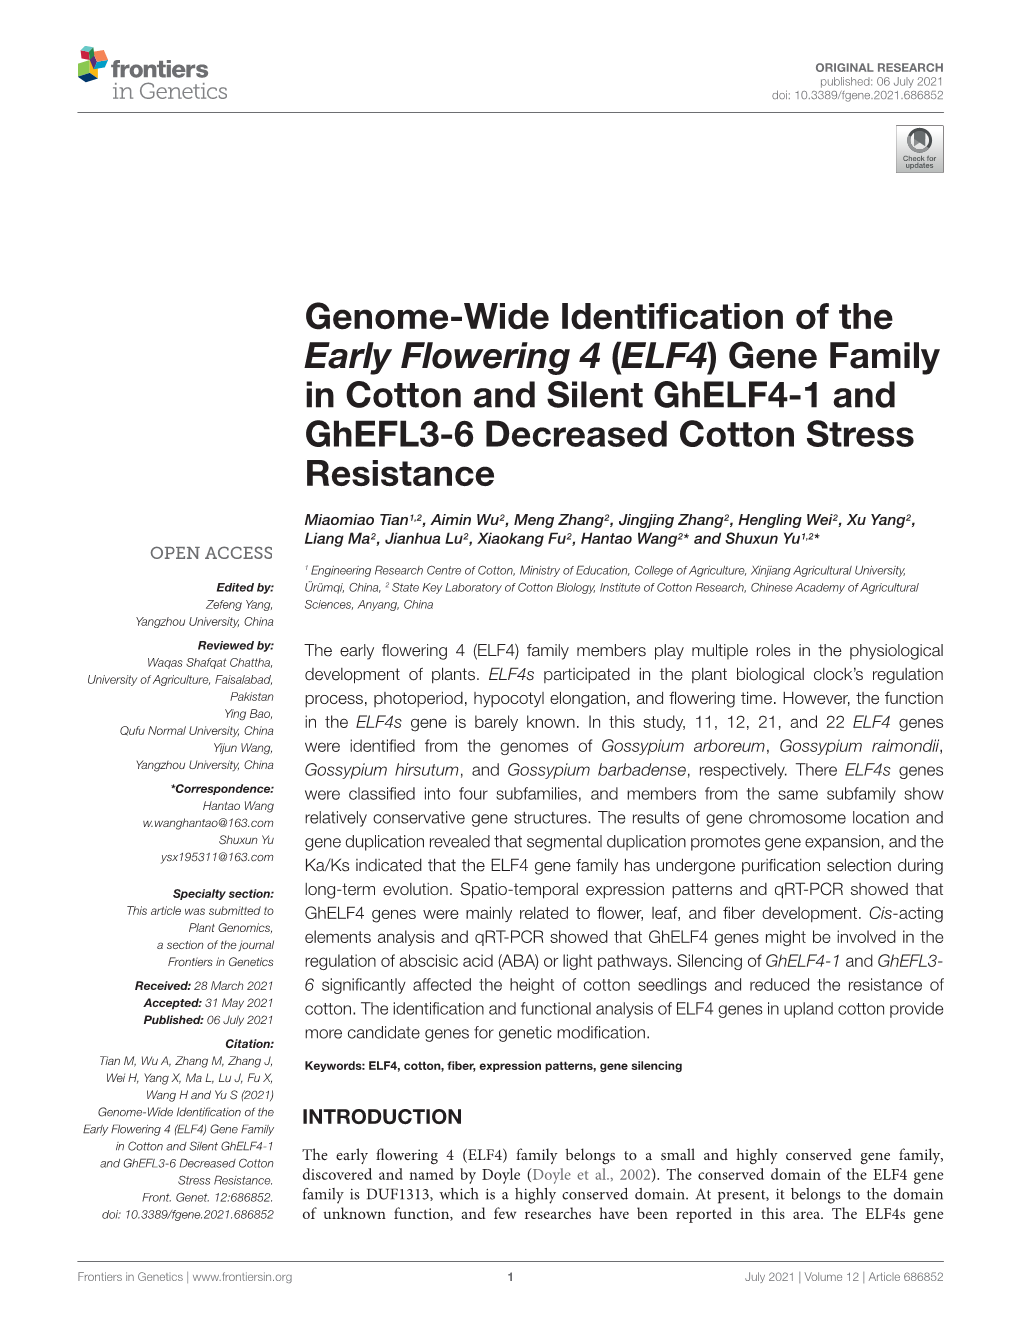 Genome-Wide Identification of the Early Flowering 4 (ELF4) Gene Family in Cotton and Silent Ghelf4-1 and Ghefl3-6 Decreased Cott